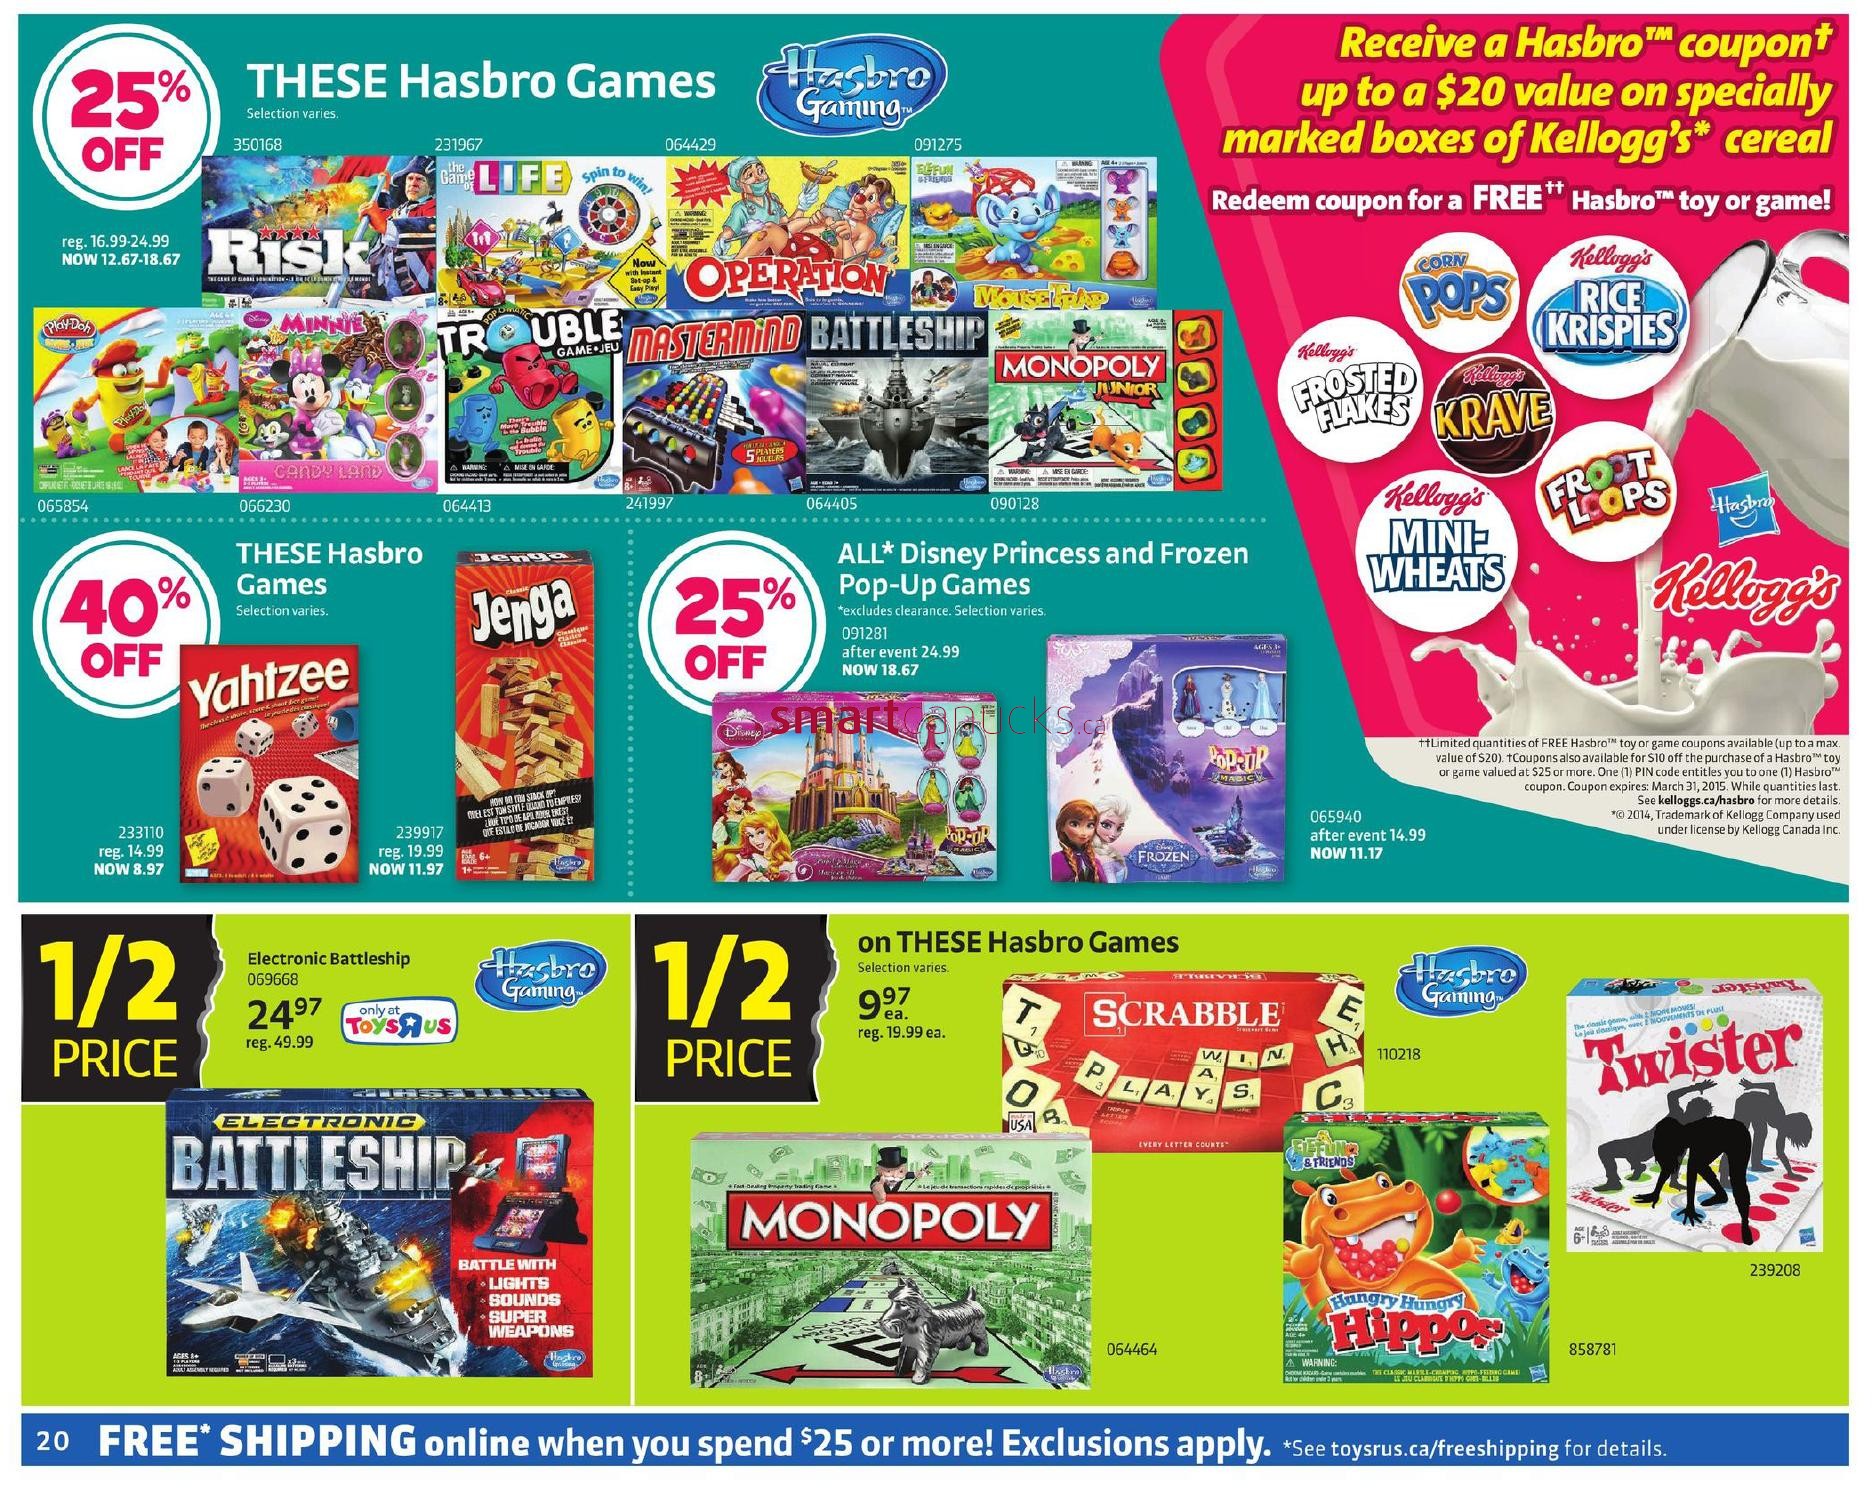 Toys R Us Black Friday Canada 2014 Flyer, Sales and Deals! › Black - What Is Toys R Us Black Friday Sale